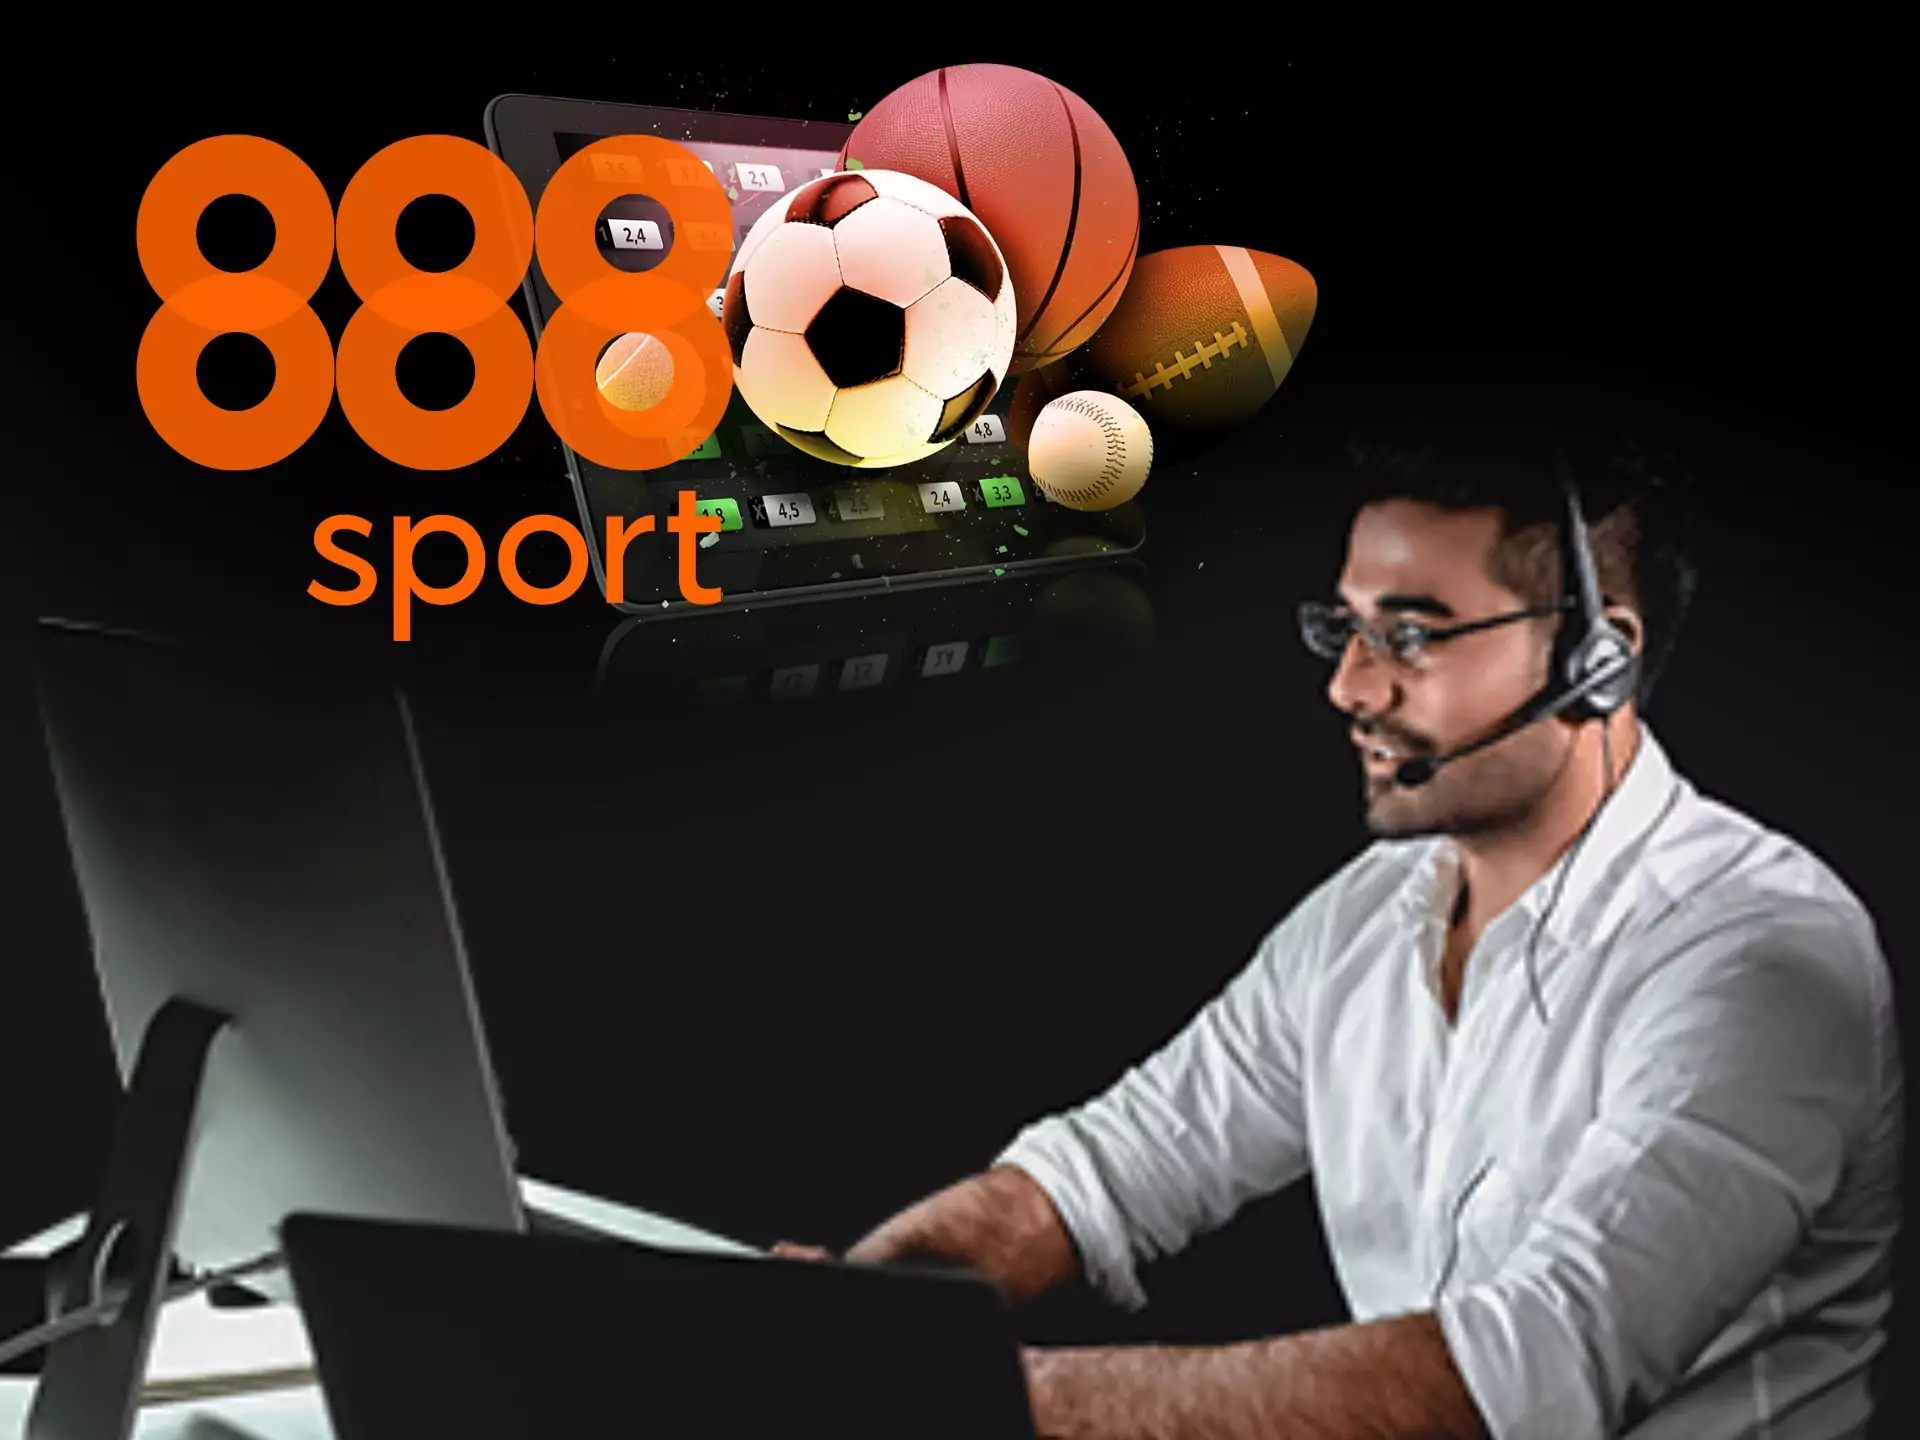 You can contact 888sport support team 24/7.